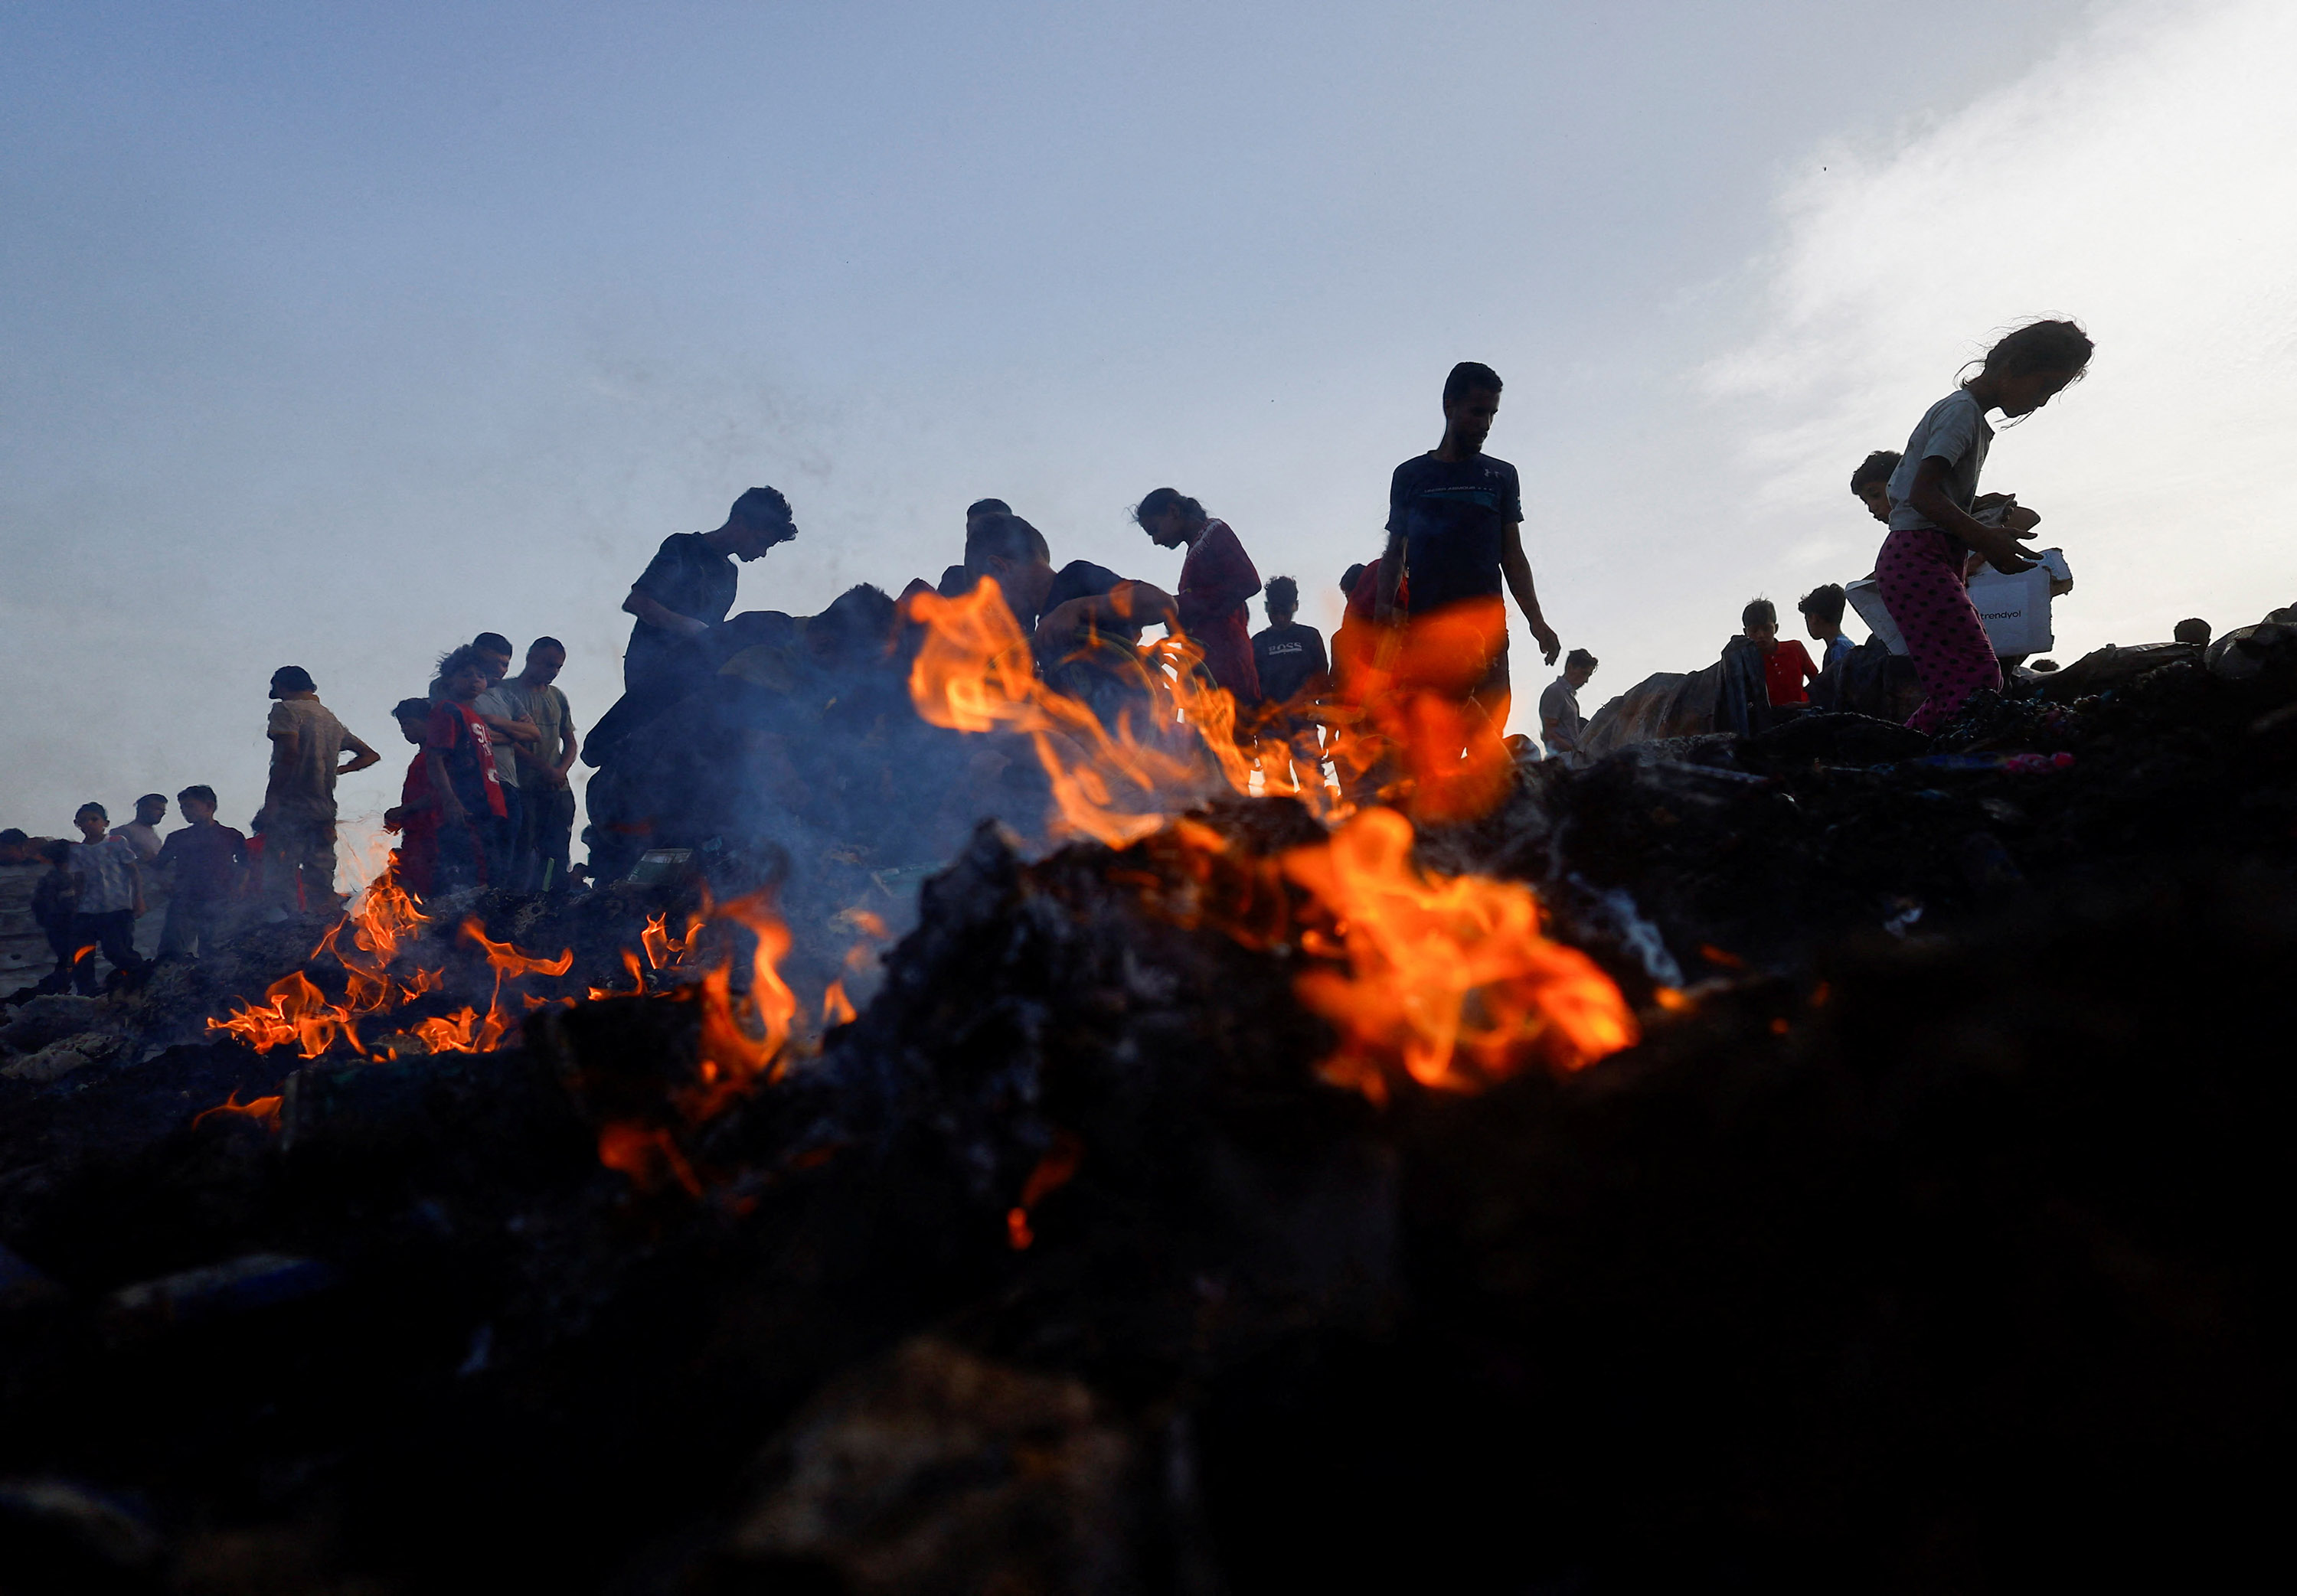 Palestinians search for food among burning debris in the aftermath of an Israeli strike in Rafah, on May 27.